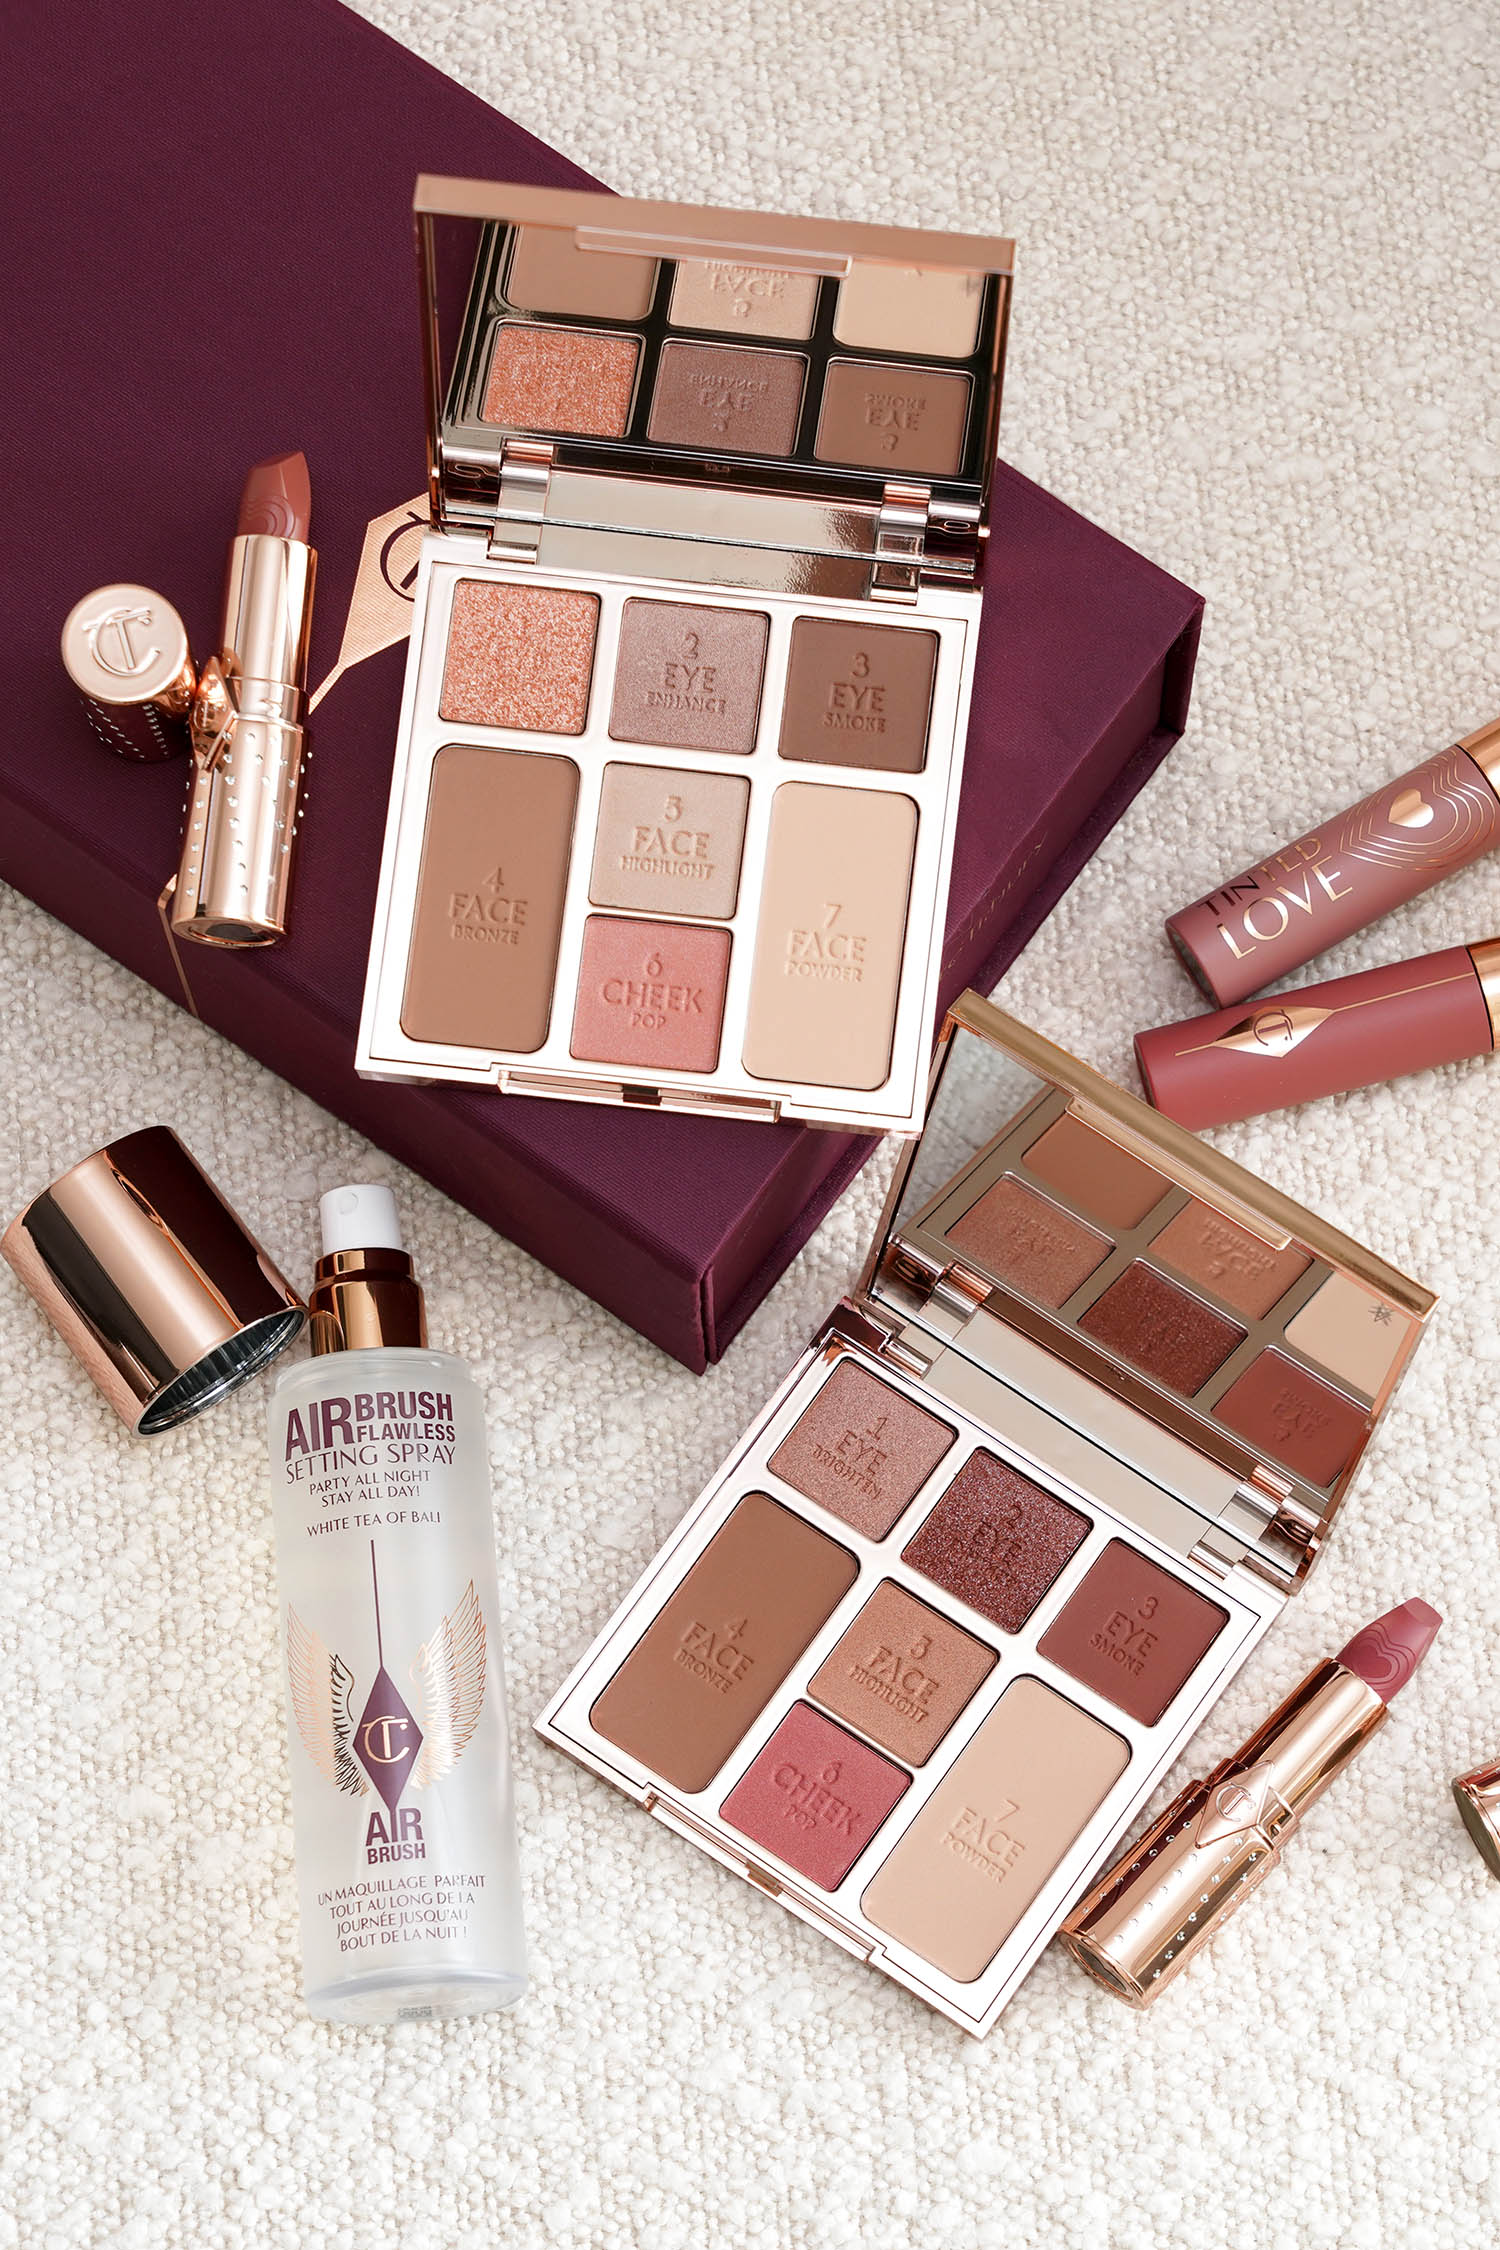 Charlotte Tilbury Beauty Archives - Page 2 of 15 - The Beauty Look